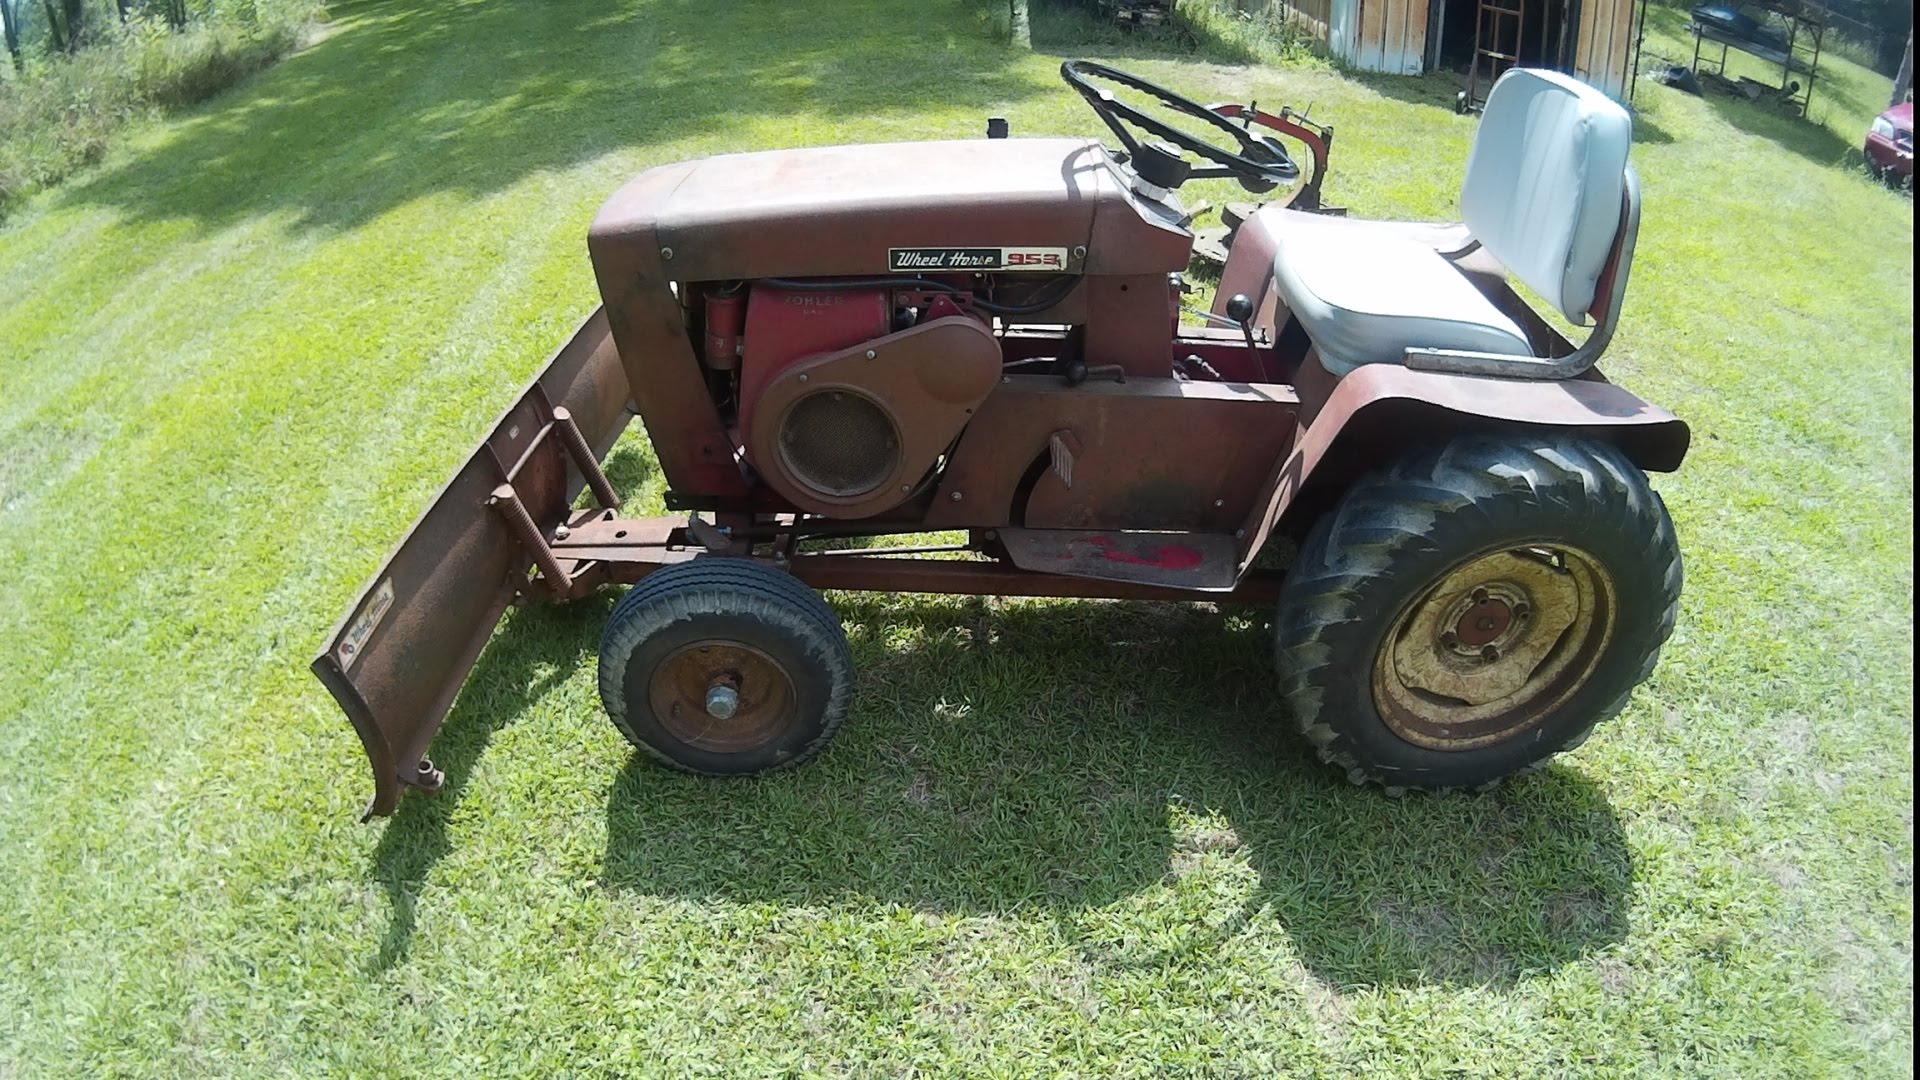 Wheel Horse 953 Lawn and Garden Tractor - YouTube